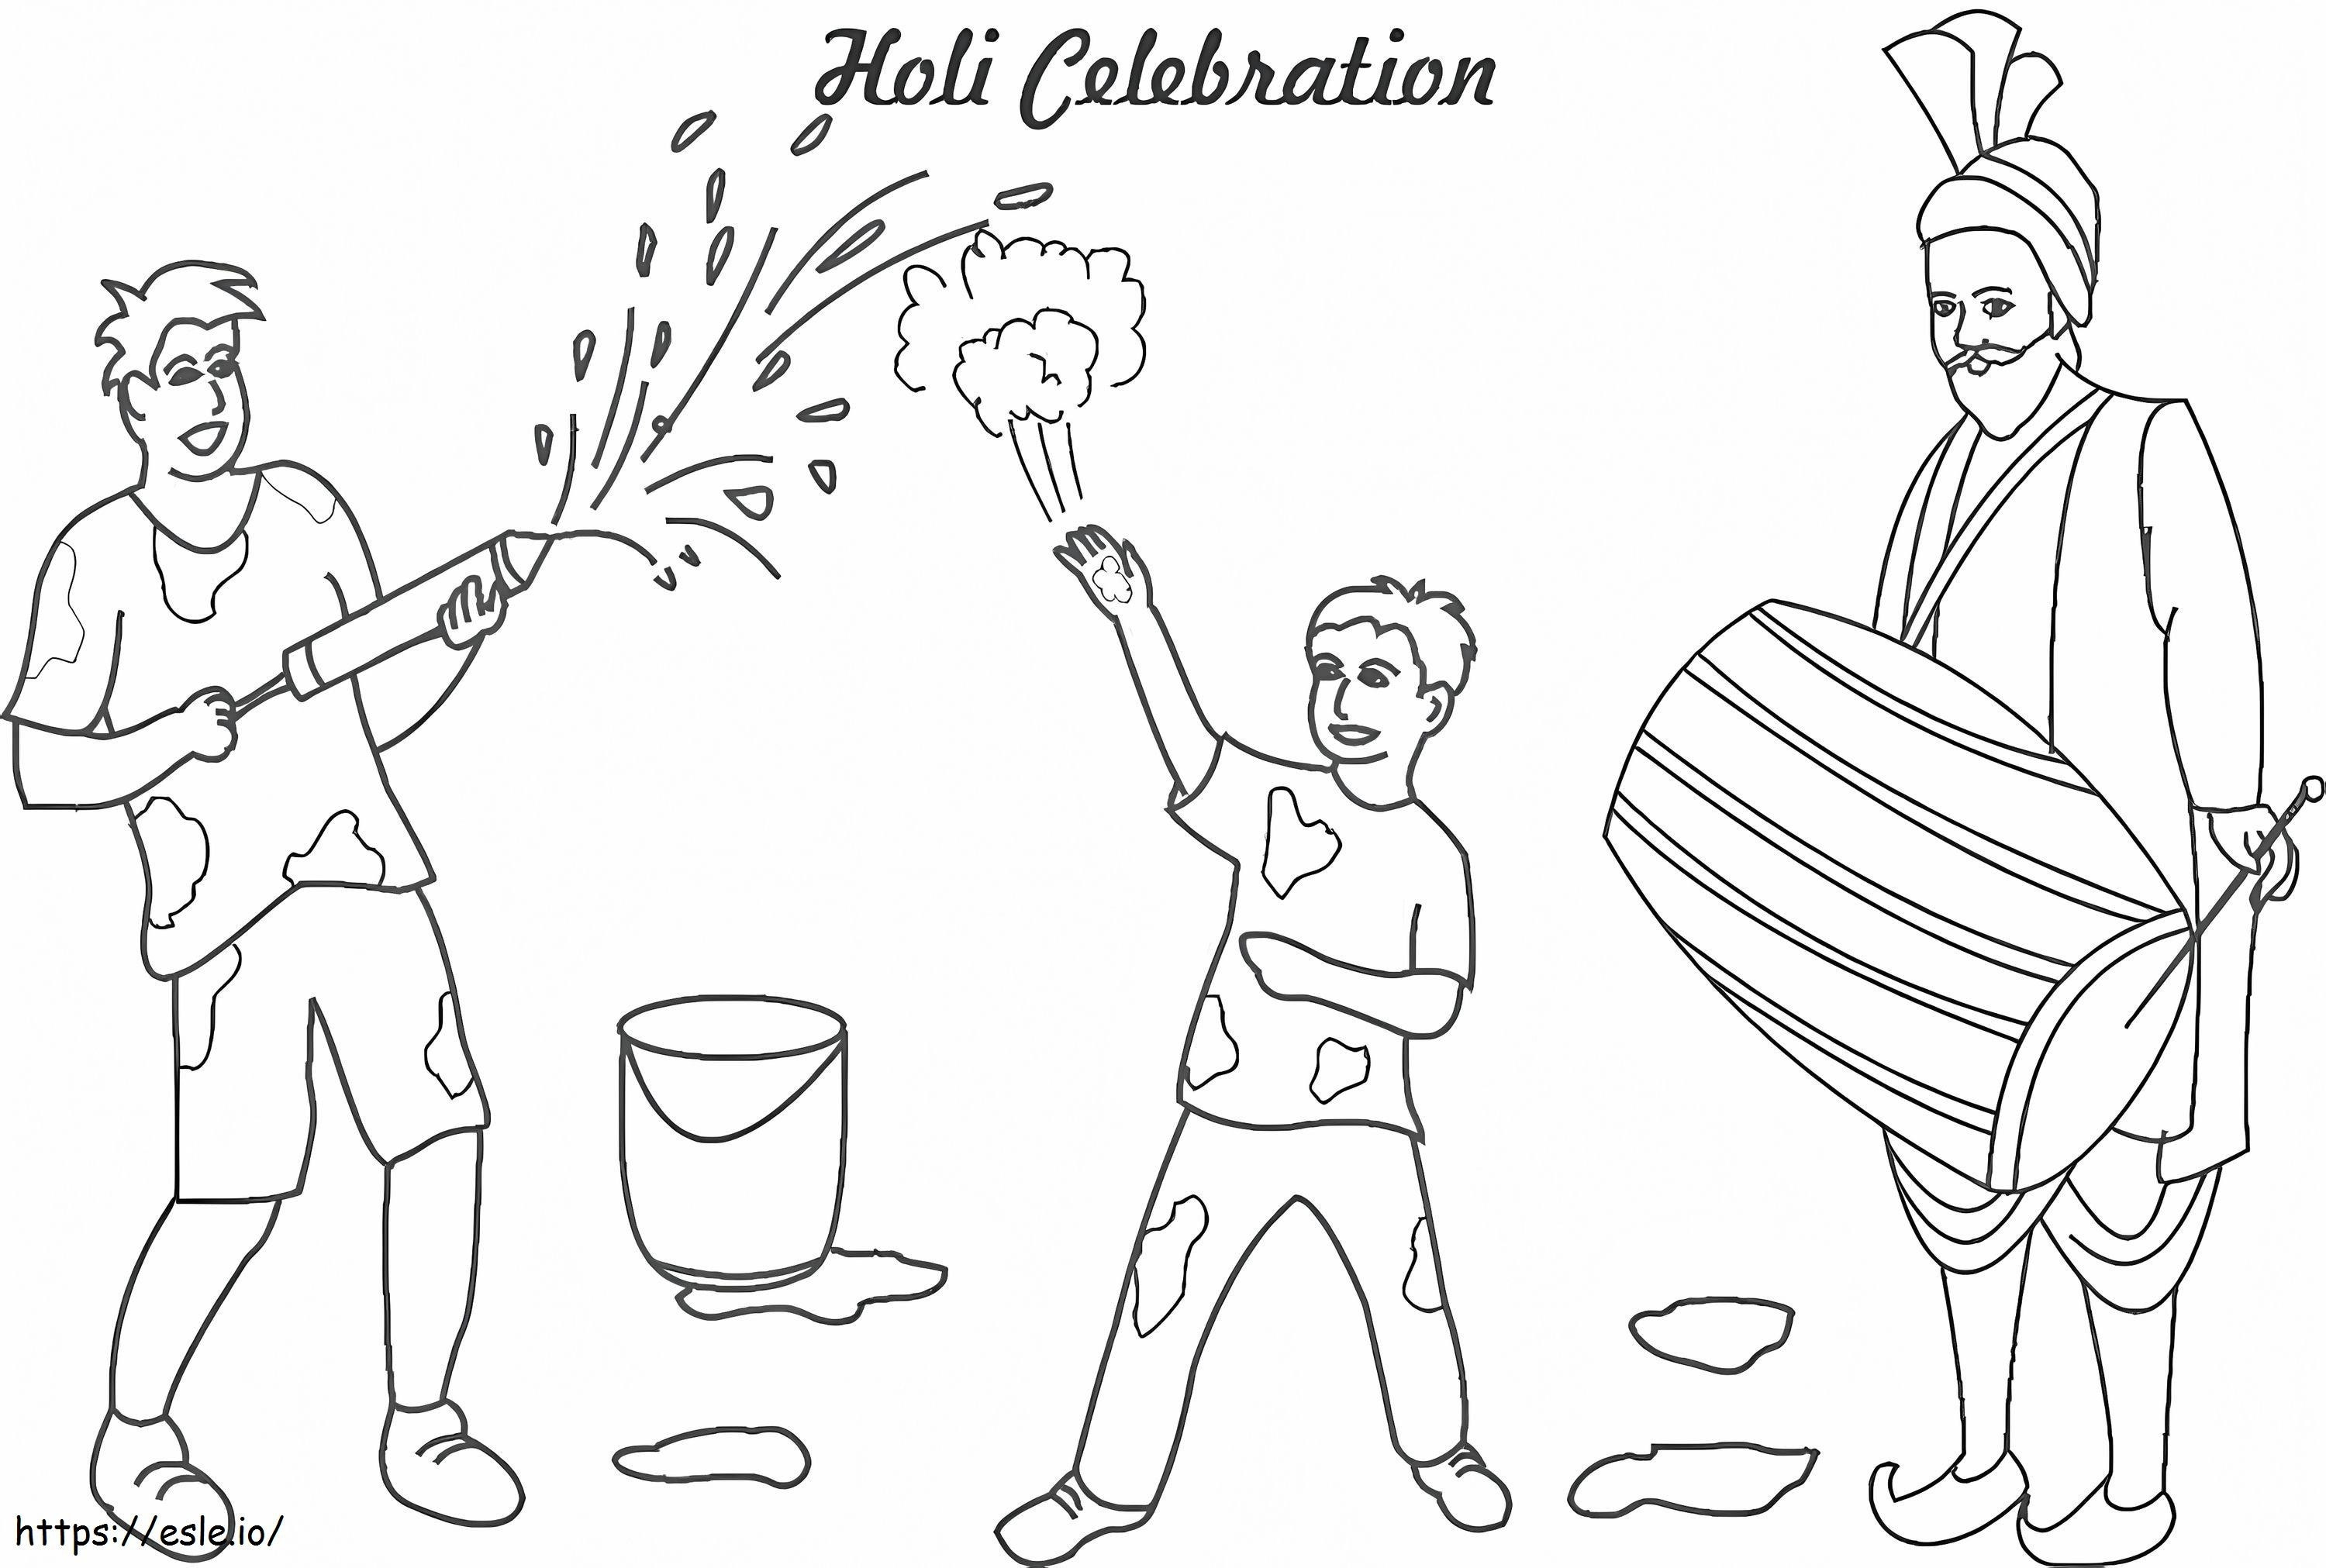 Happy Holi 2 coloring page